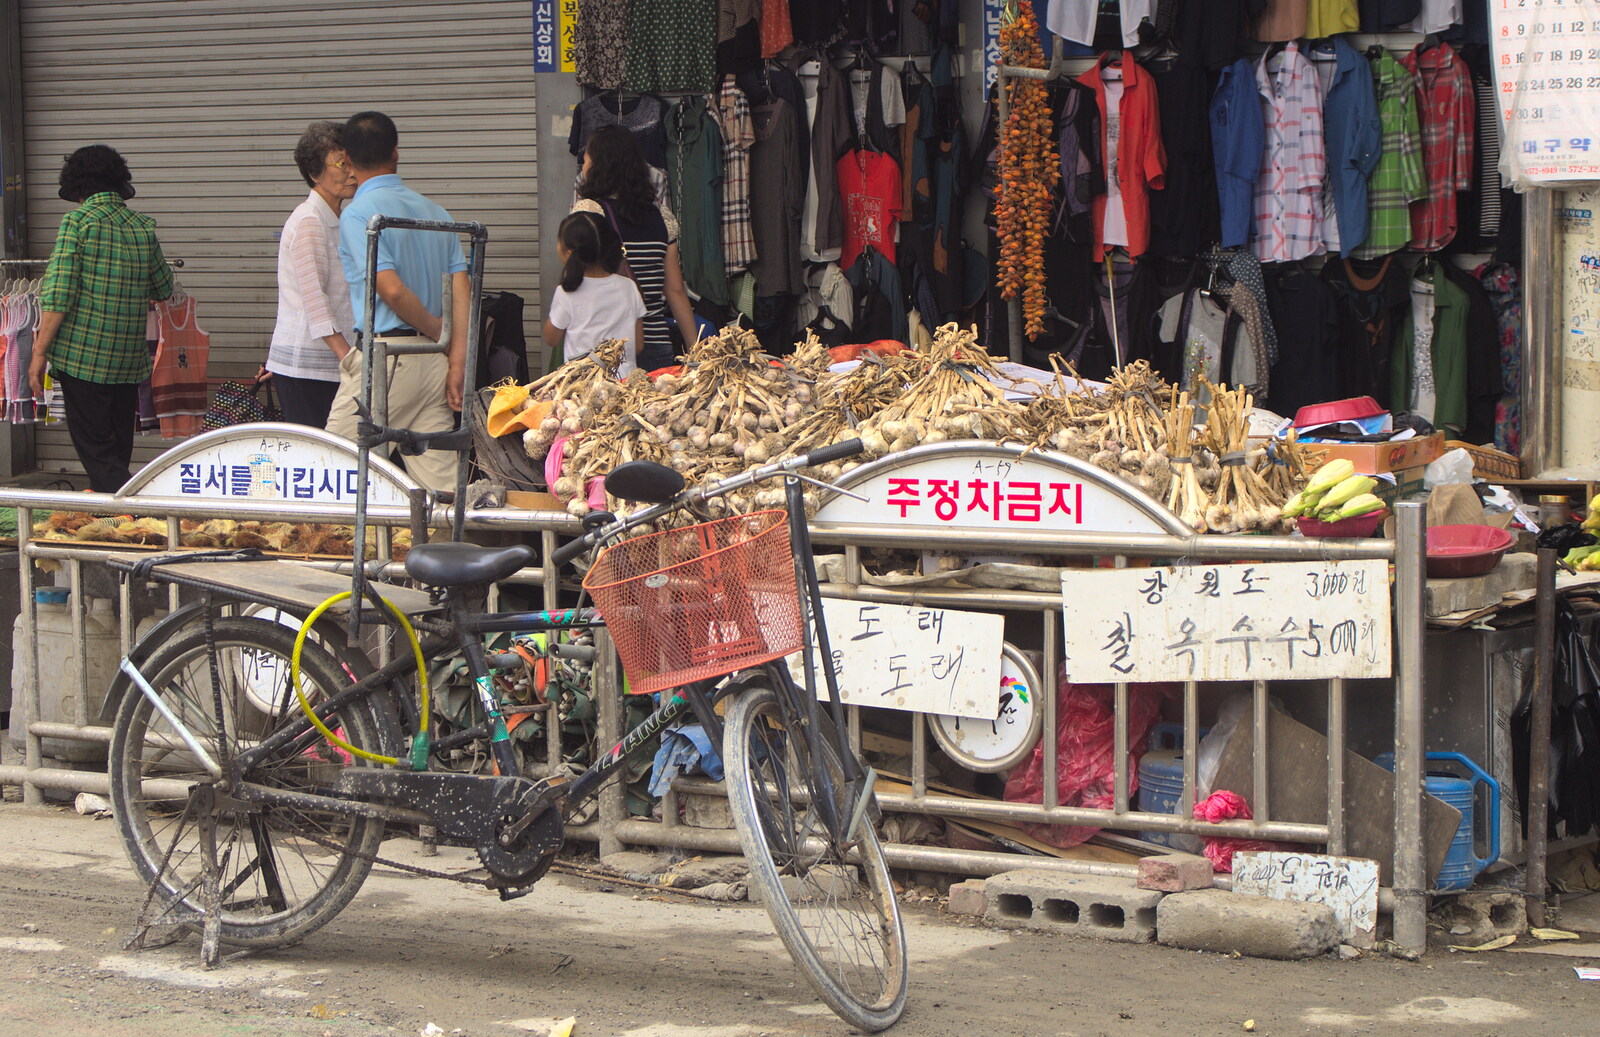 A creaky old bicycle and a pile of garlic from Seomun Market, Daegu, South Korea - 1st July 2012